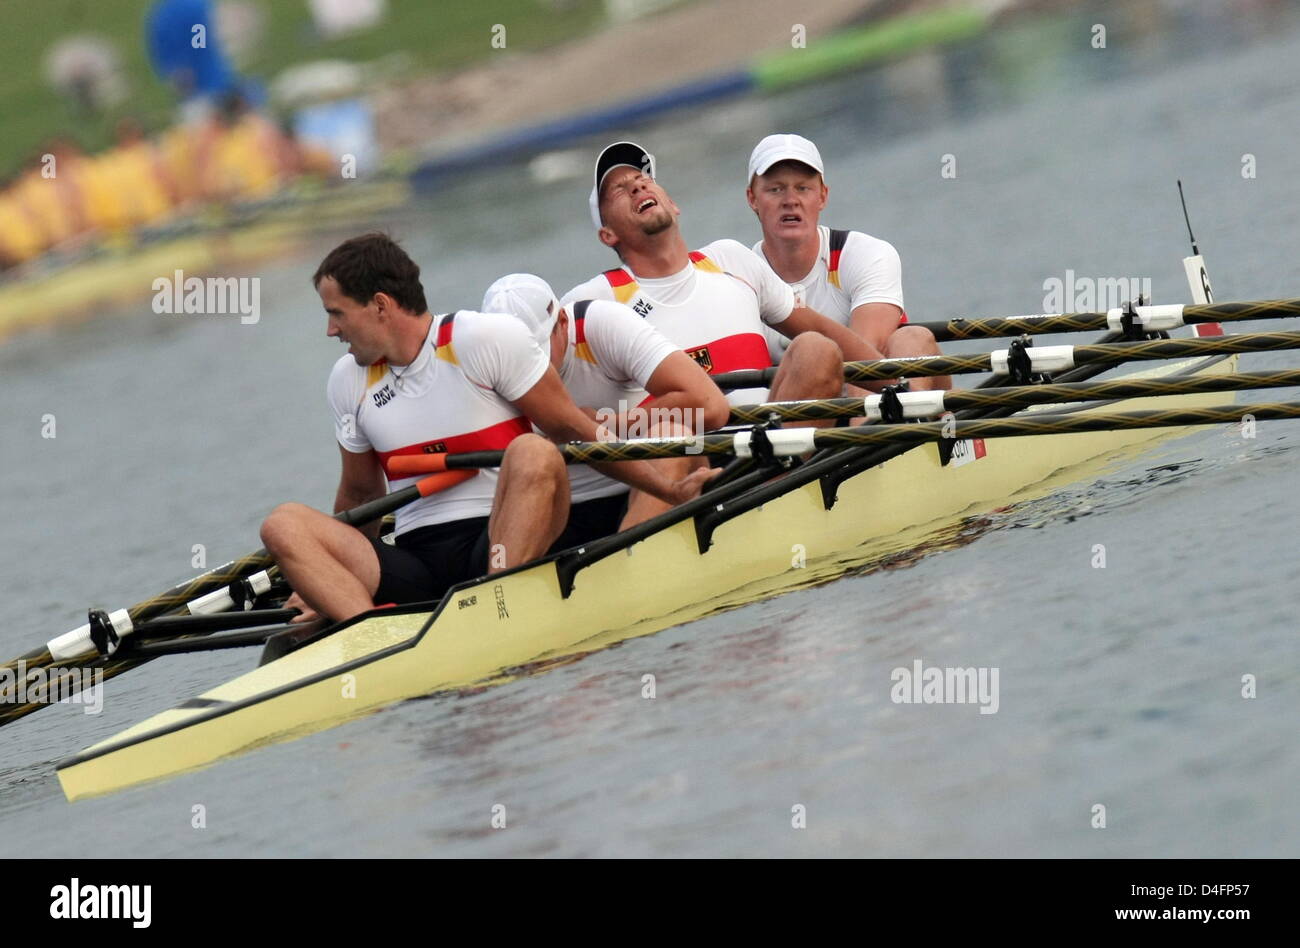 German Stephan Krueger, René Bertram, Hans Gruhne and Christian Schreiber reacts after the Men's Quadruple Sculls rowing Final at the Shunyi Olympic Rowing Park at the Beijing 2008 Olympic Games, Beijing, China, 17 August 2008. Photo: JENS BUETTNER ###dpa### Stock Photo